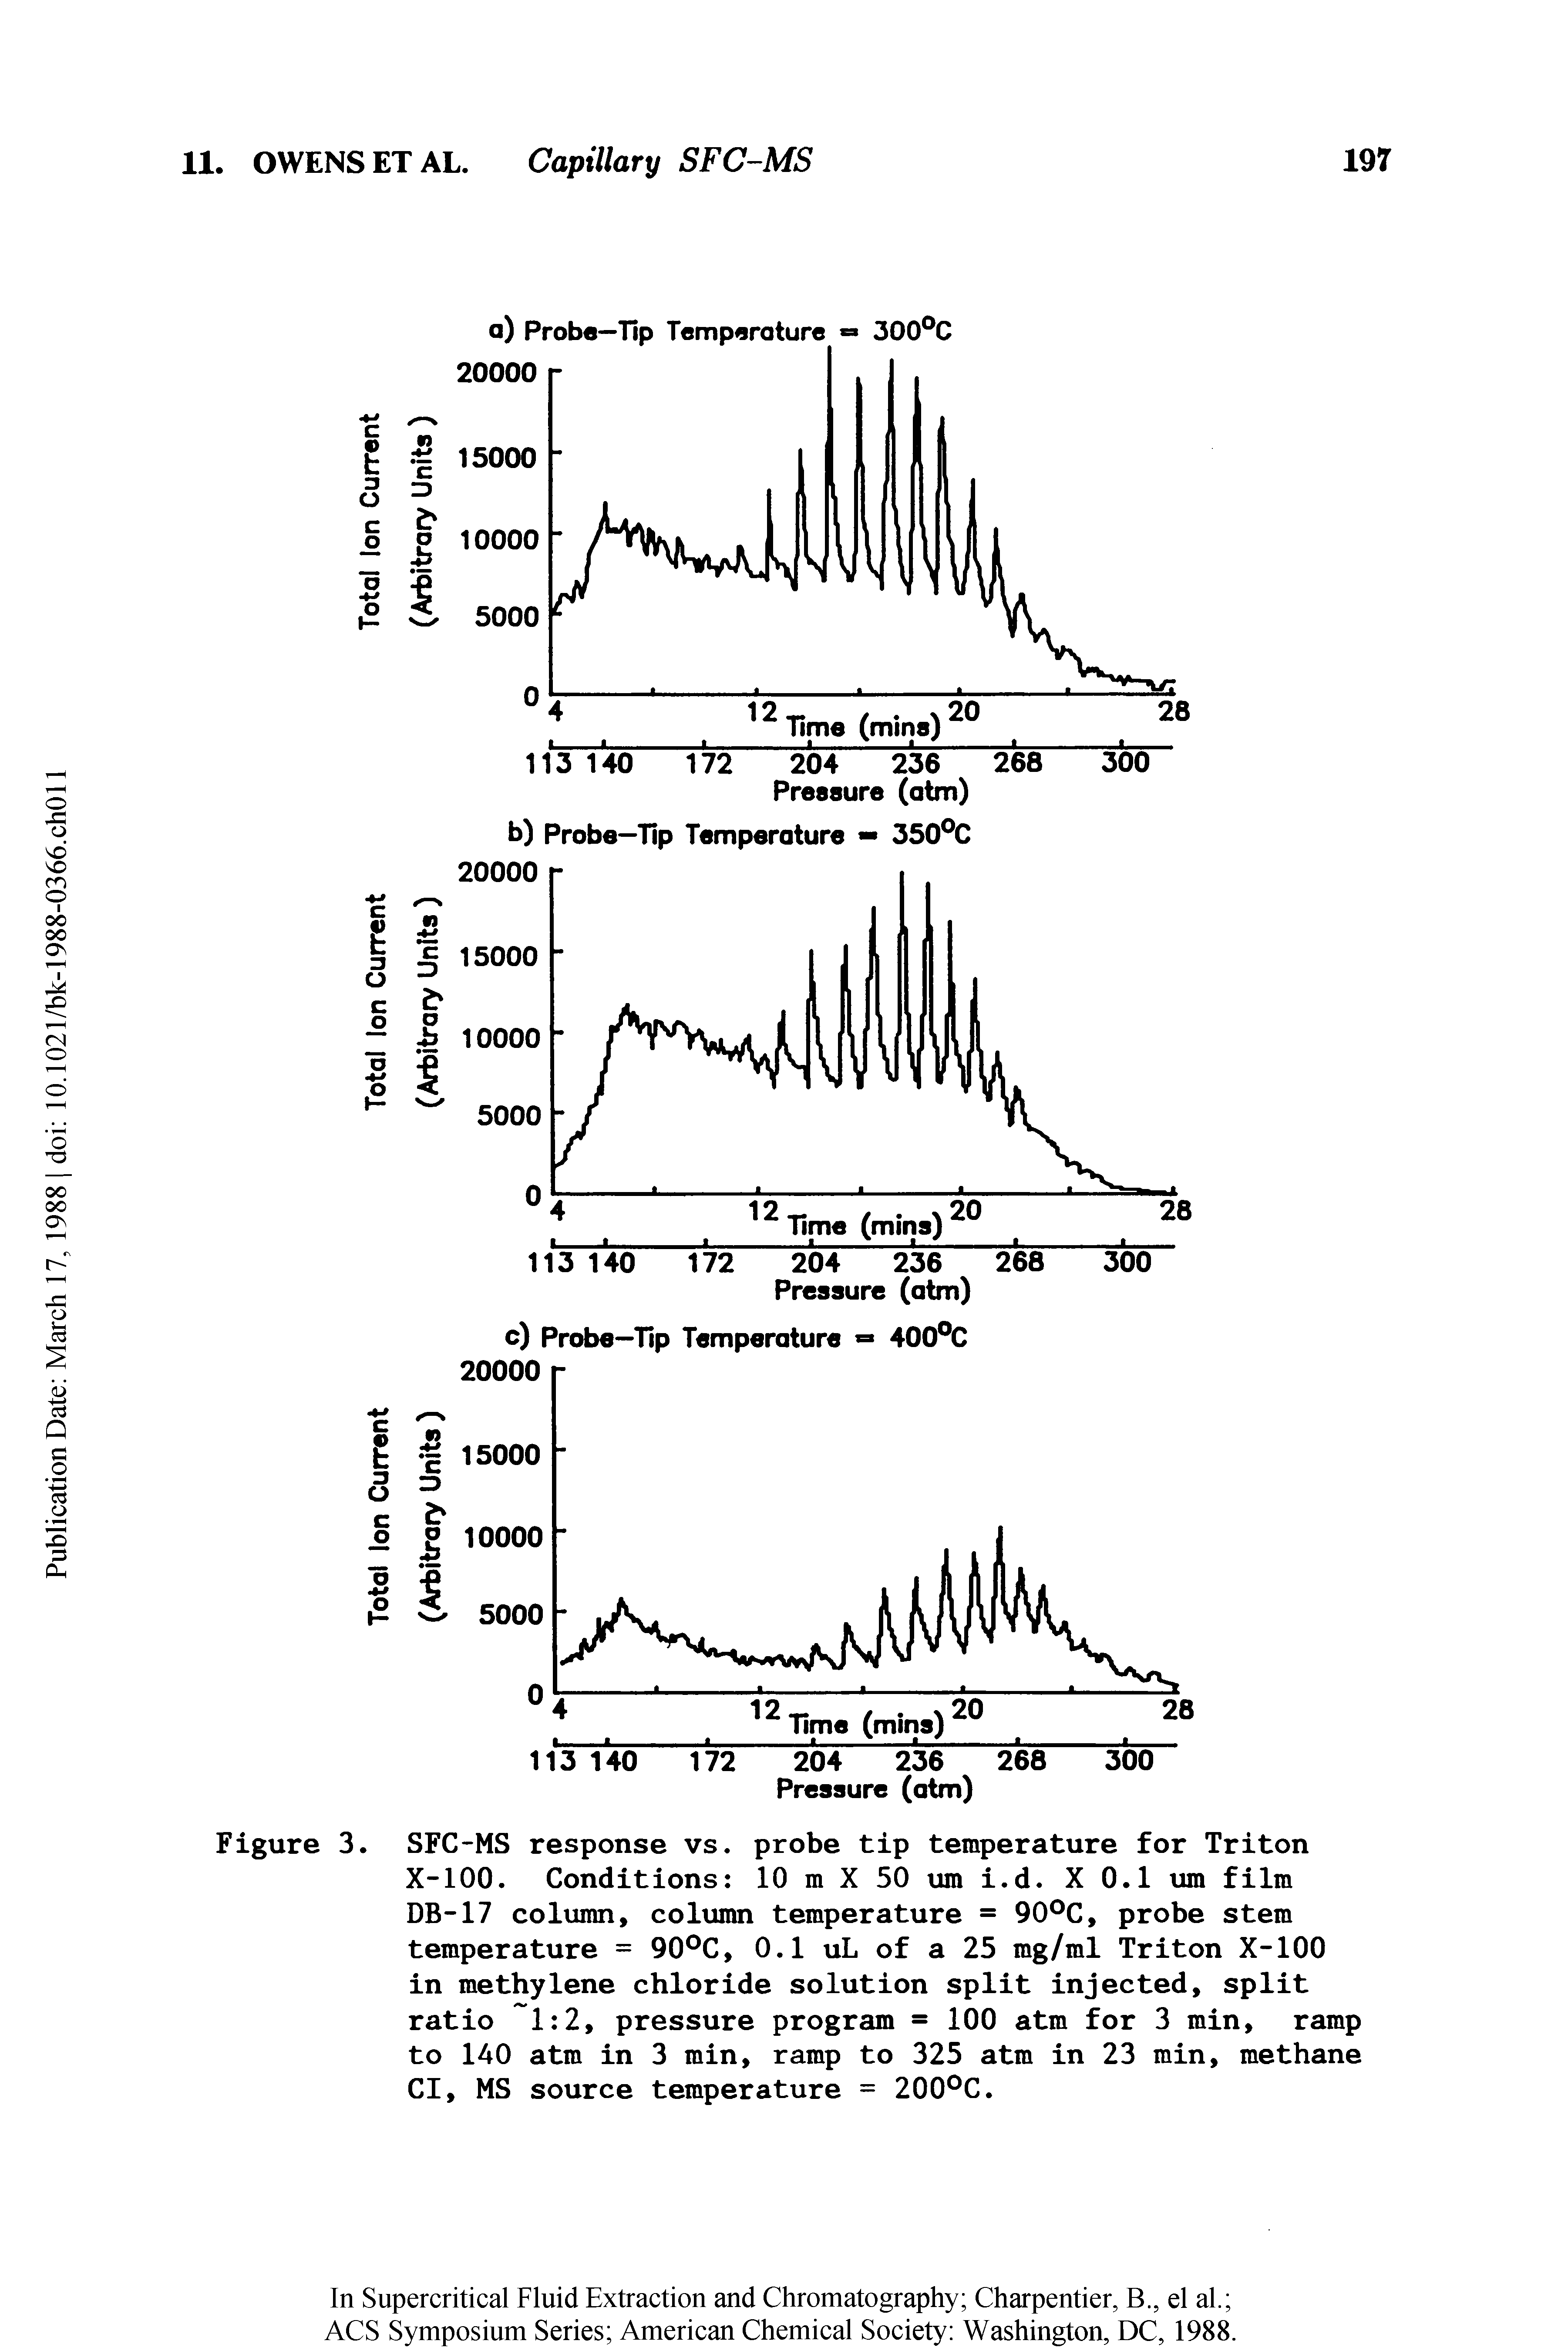 Figure 3. SFC-MS response vs. probe tip temperature for Triton X-100. Conditions 10 m X 50 urn i.d. X 0.1 um film DB-17 column, column temperature = 90 C, probe stem temperature = 90 C, 0.1 uL of a 25 mg/ml Triton X-100 in methylene chloride solution split injected, split ratio 1 2, pressure program = 100 atm for 3 min, ramp to lAO atm in 3 min, ramp to 325 atm in 23 min, methane Cl, MS source temperature = 200 C.